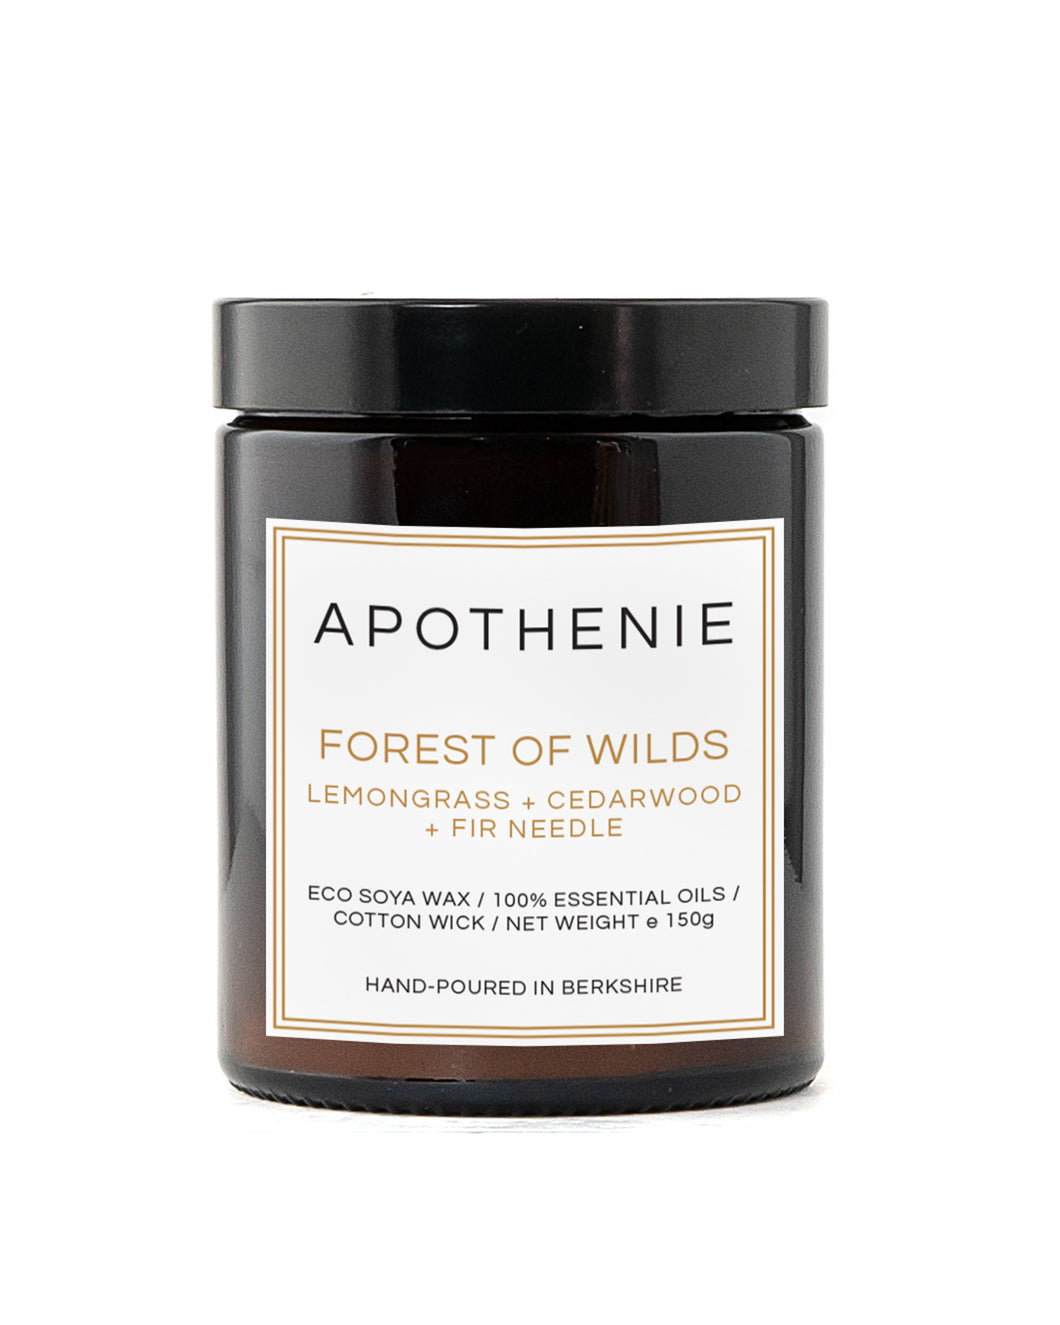 16.00 Forest of Wilds Travel Refill freeshipping - Apothenie UK